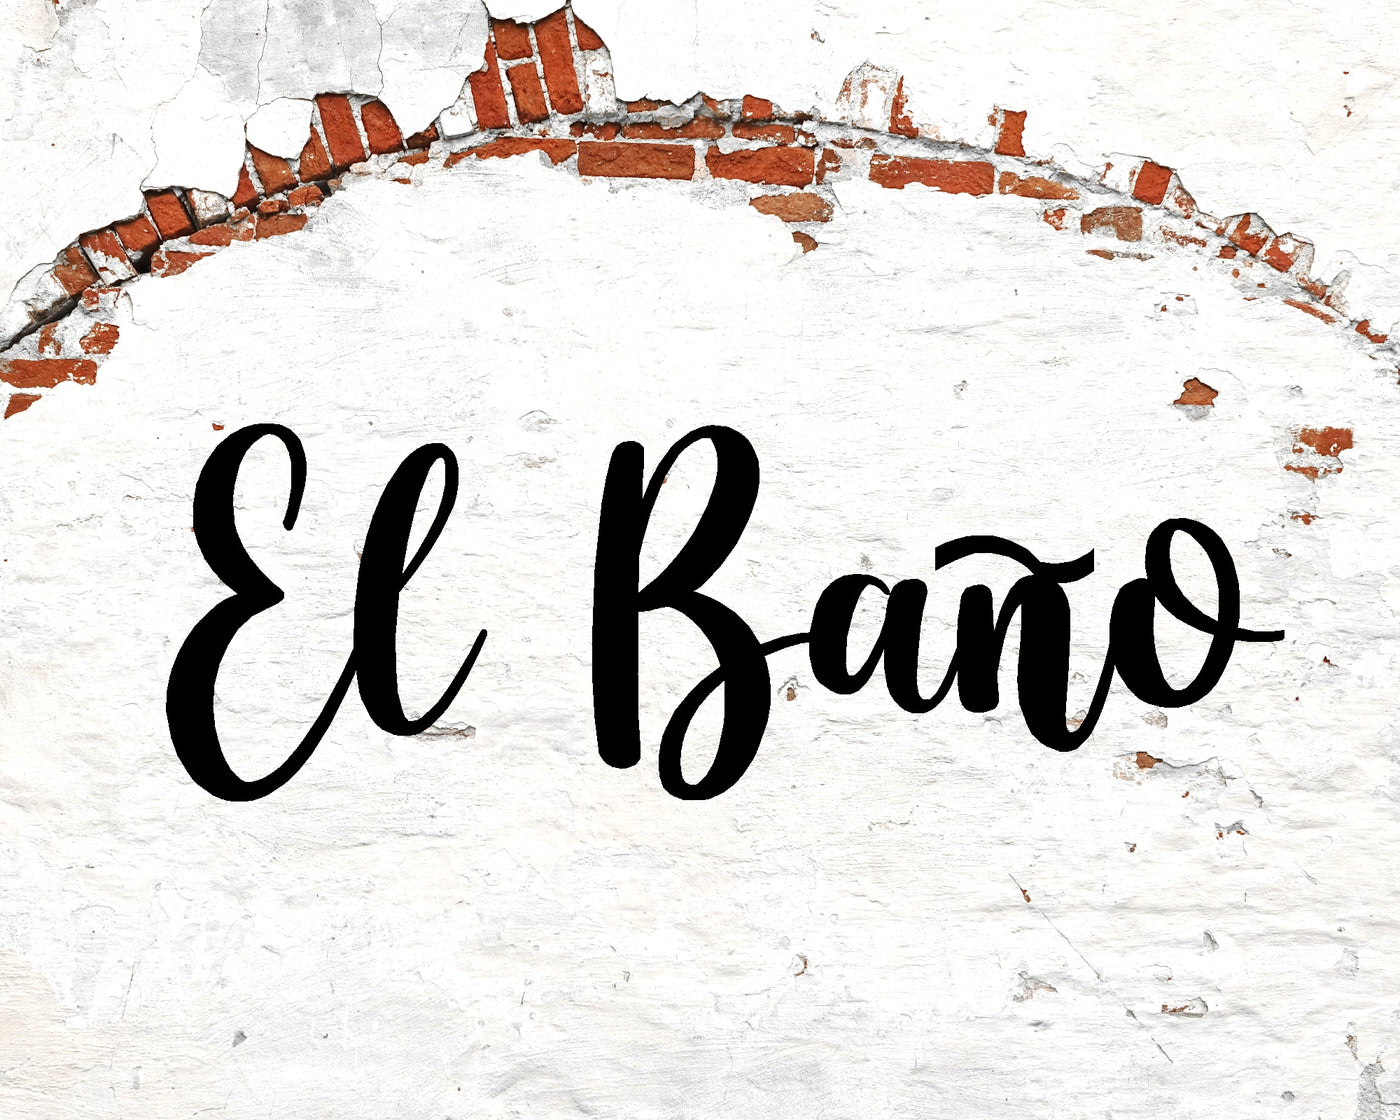 El Bano Spanish Restroom Metal Word Sign - Madison Iron and Wood - Wall Art - metal outdoor decor - Steel deocrations - american made products - veteran owned business products - fencing decorations - fencing supplies - custom wall decorations - personalized wall signs - steel - decorative post caps - steel post caps - metal post caps - brackets - structural brackets - home improvement - easter - easter decorations - easter gift - easter yard decor